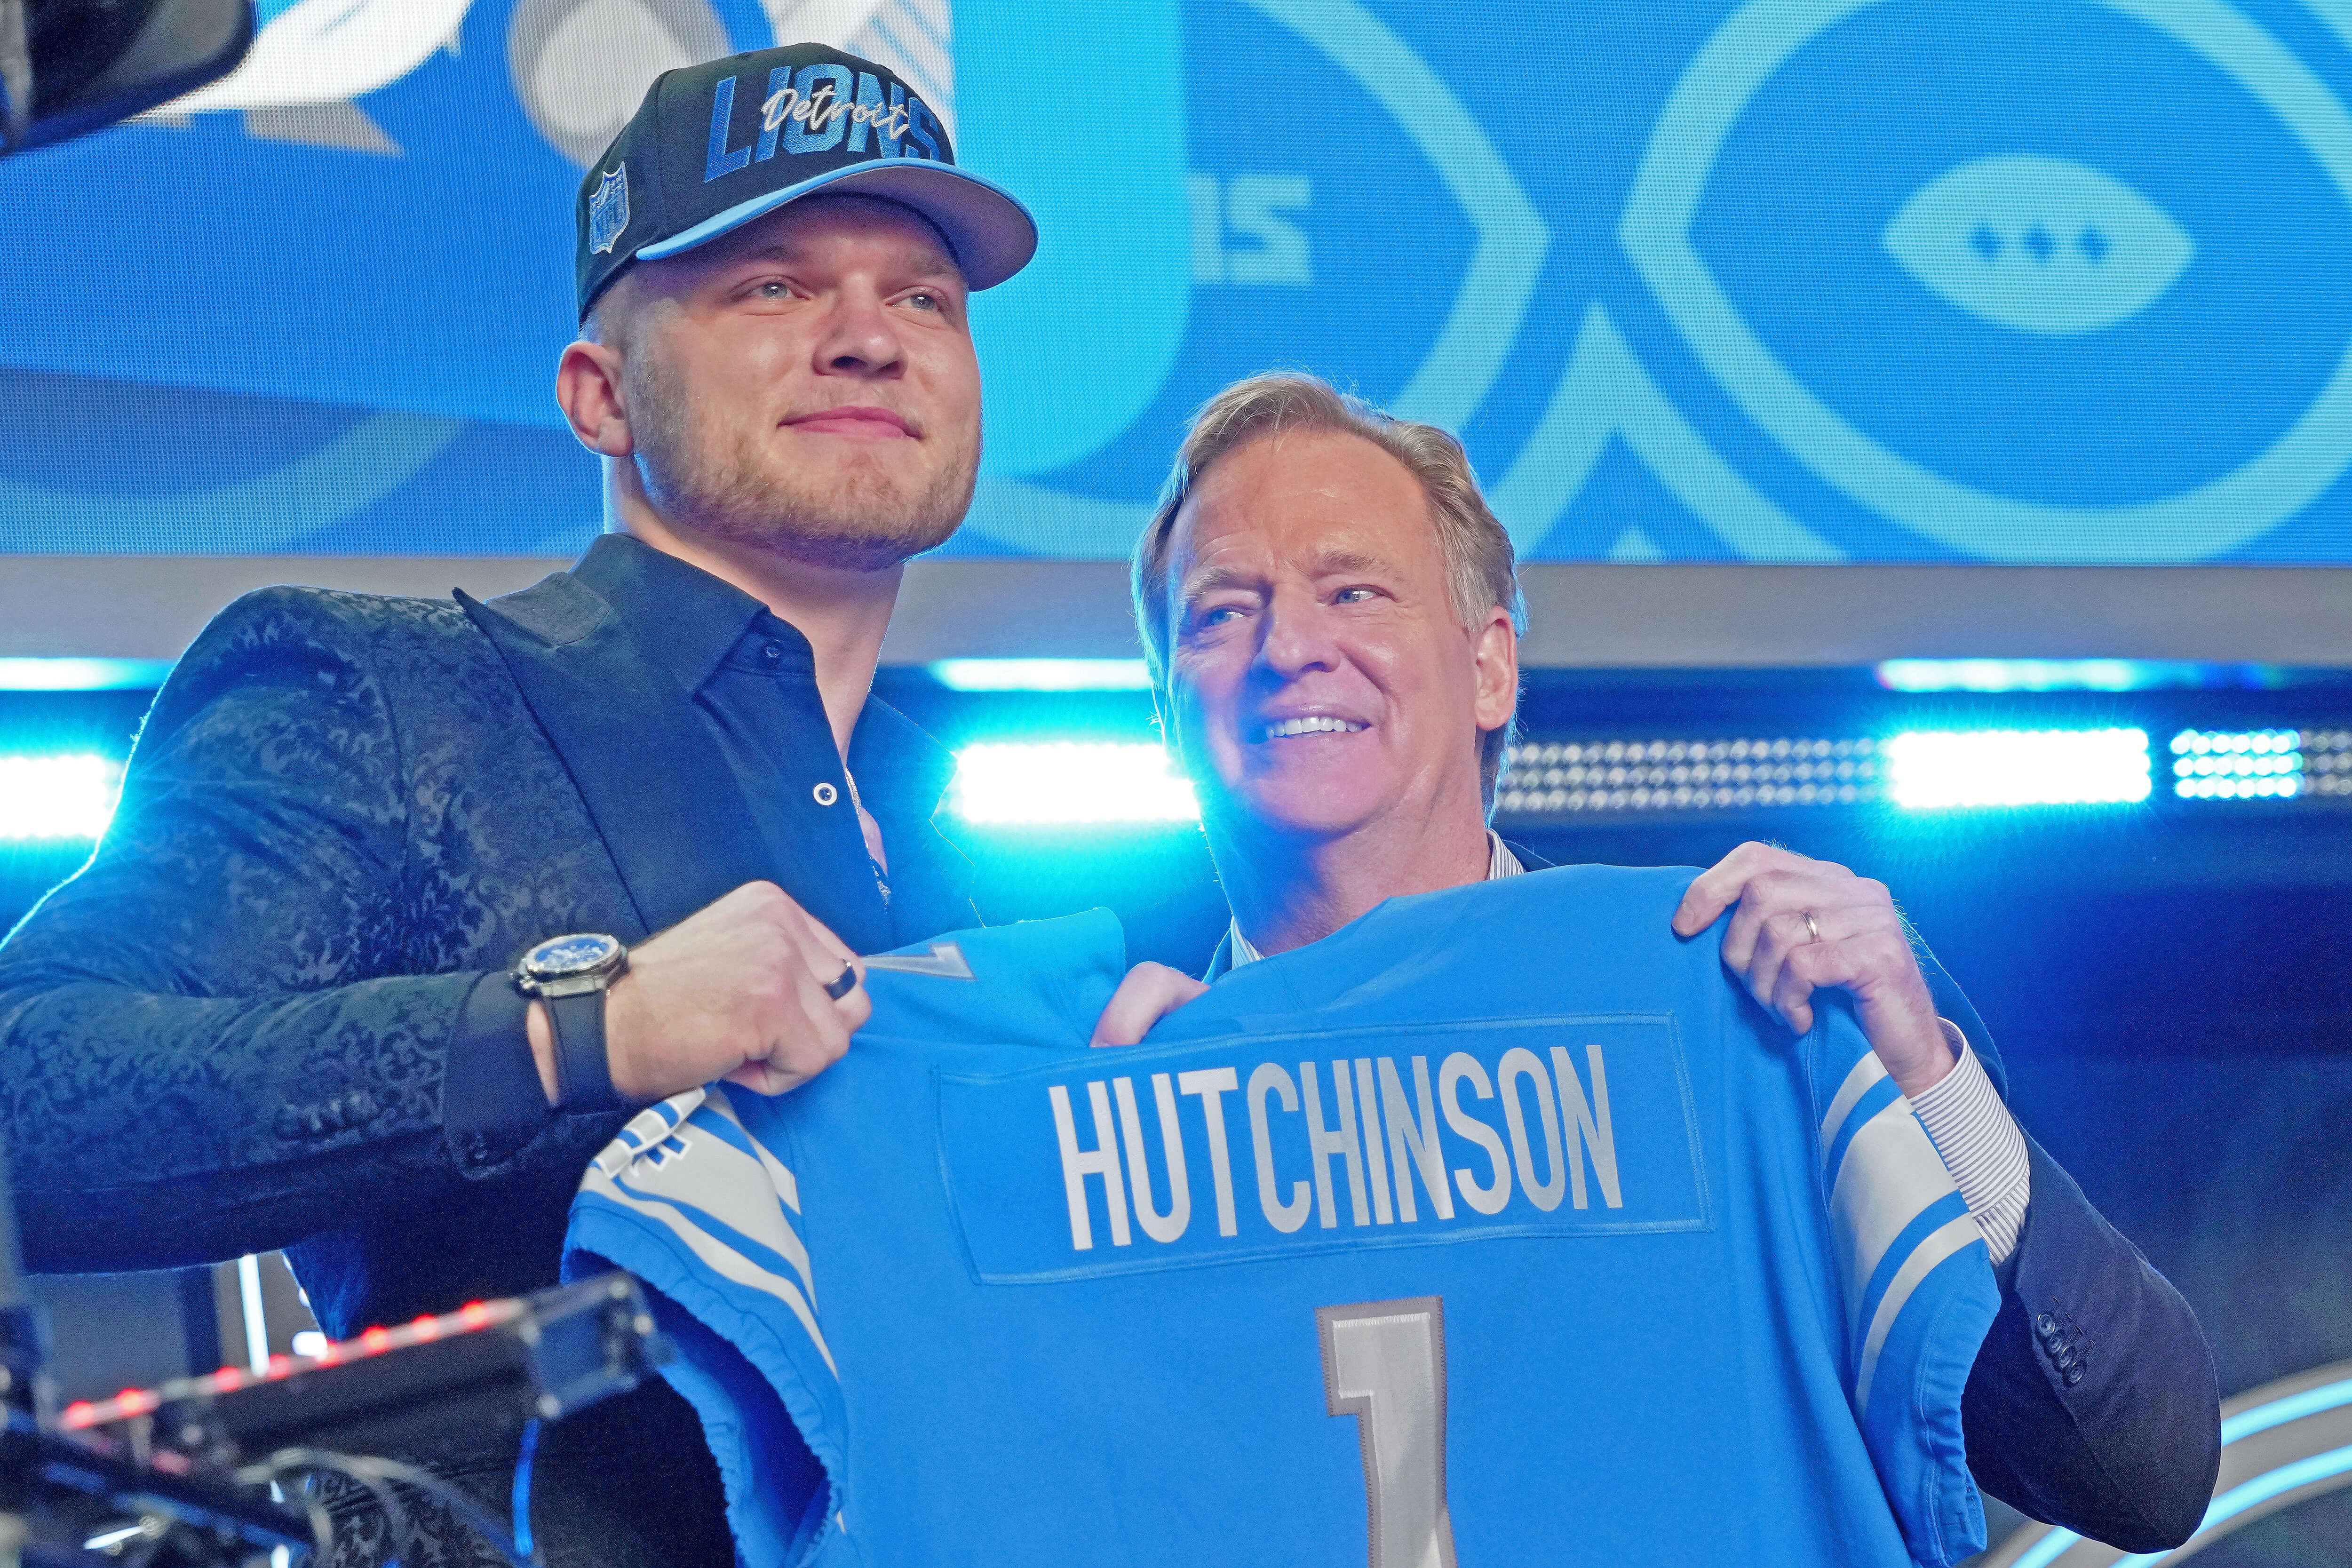 How To Bet - 2022 NFL Defensive Rookie of the Year Odds: Hutchinson Early Favorite